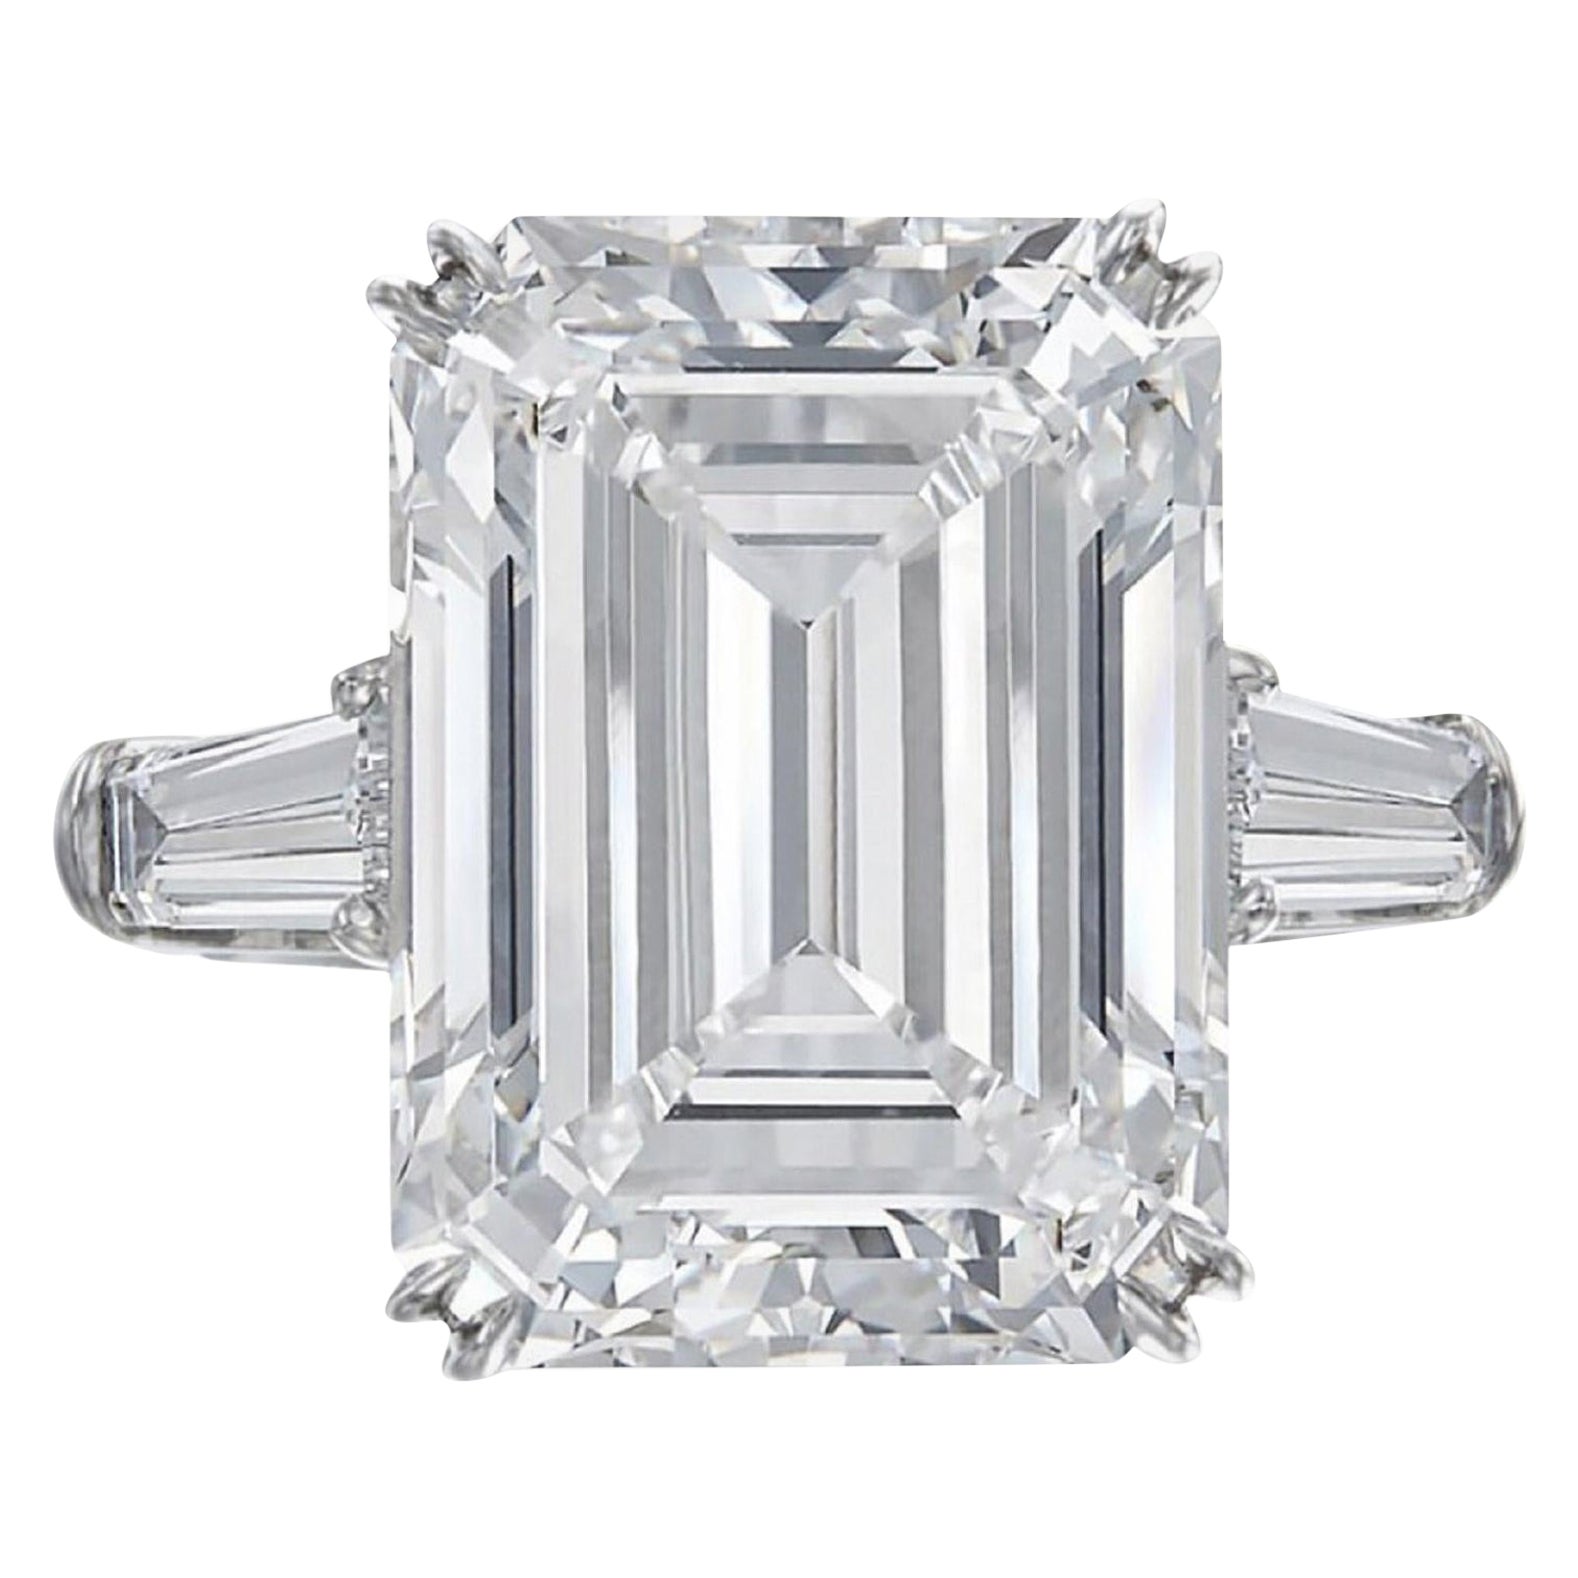 Embark on a journey of unparalleled luxury with our extraordinary GIA Certified 17 Carat Emerald Cut Diamond Engagement Ring – a masterpiece that transcends the boundaries of opulence.
Color Grade: H
Clarity Grade: VS1
Polish: Excellent
Symmetry: